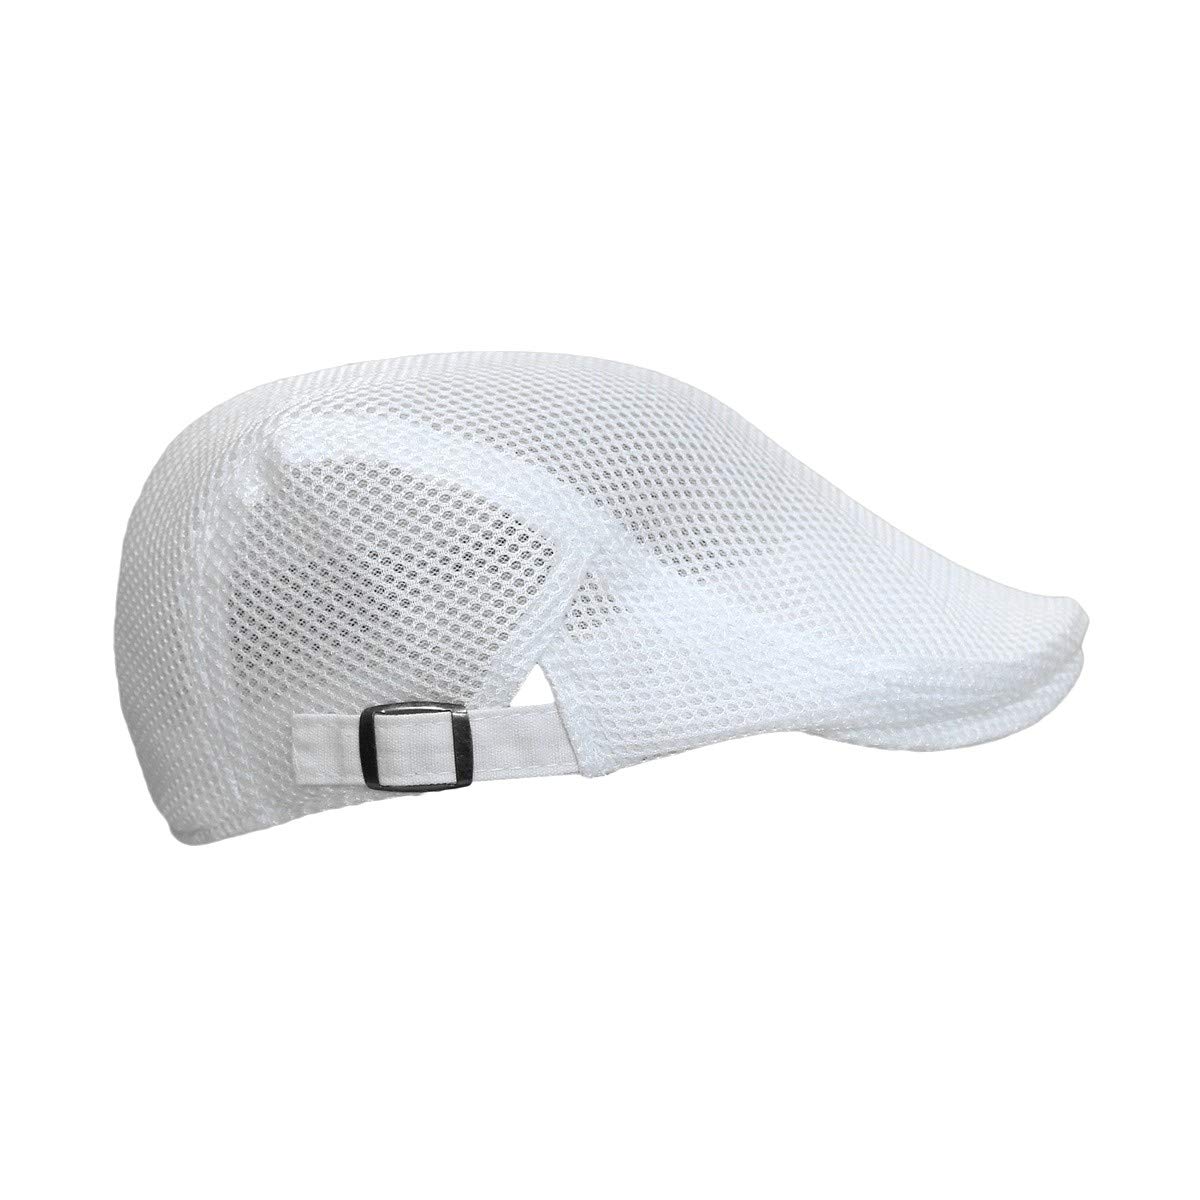 With Coons TZ30046 Summer Cool Mesh Hunting Hat, Adjustable Size